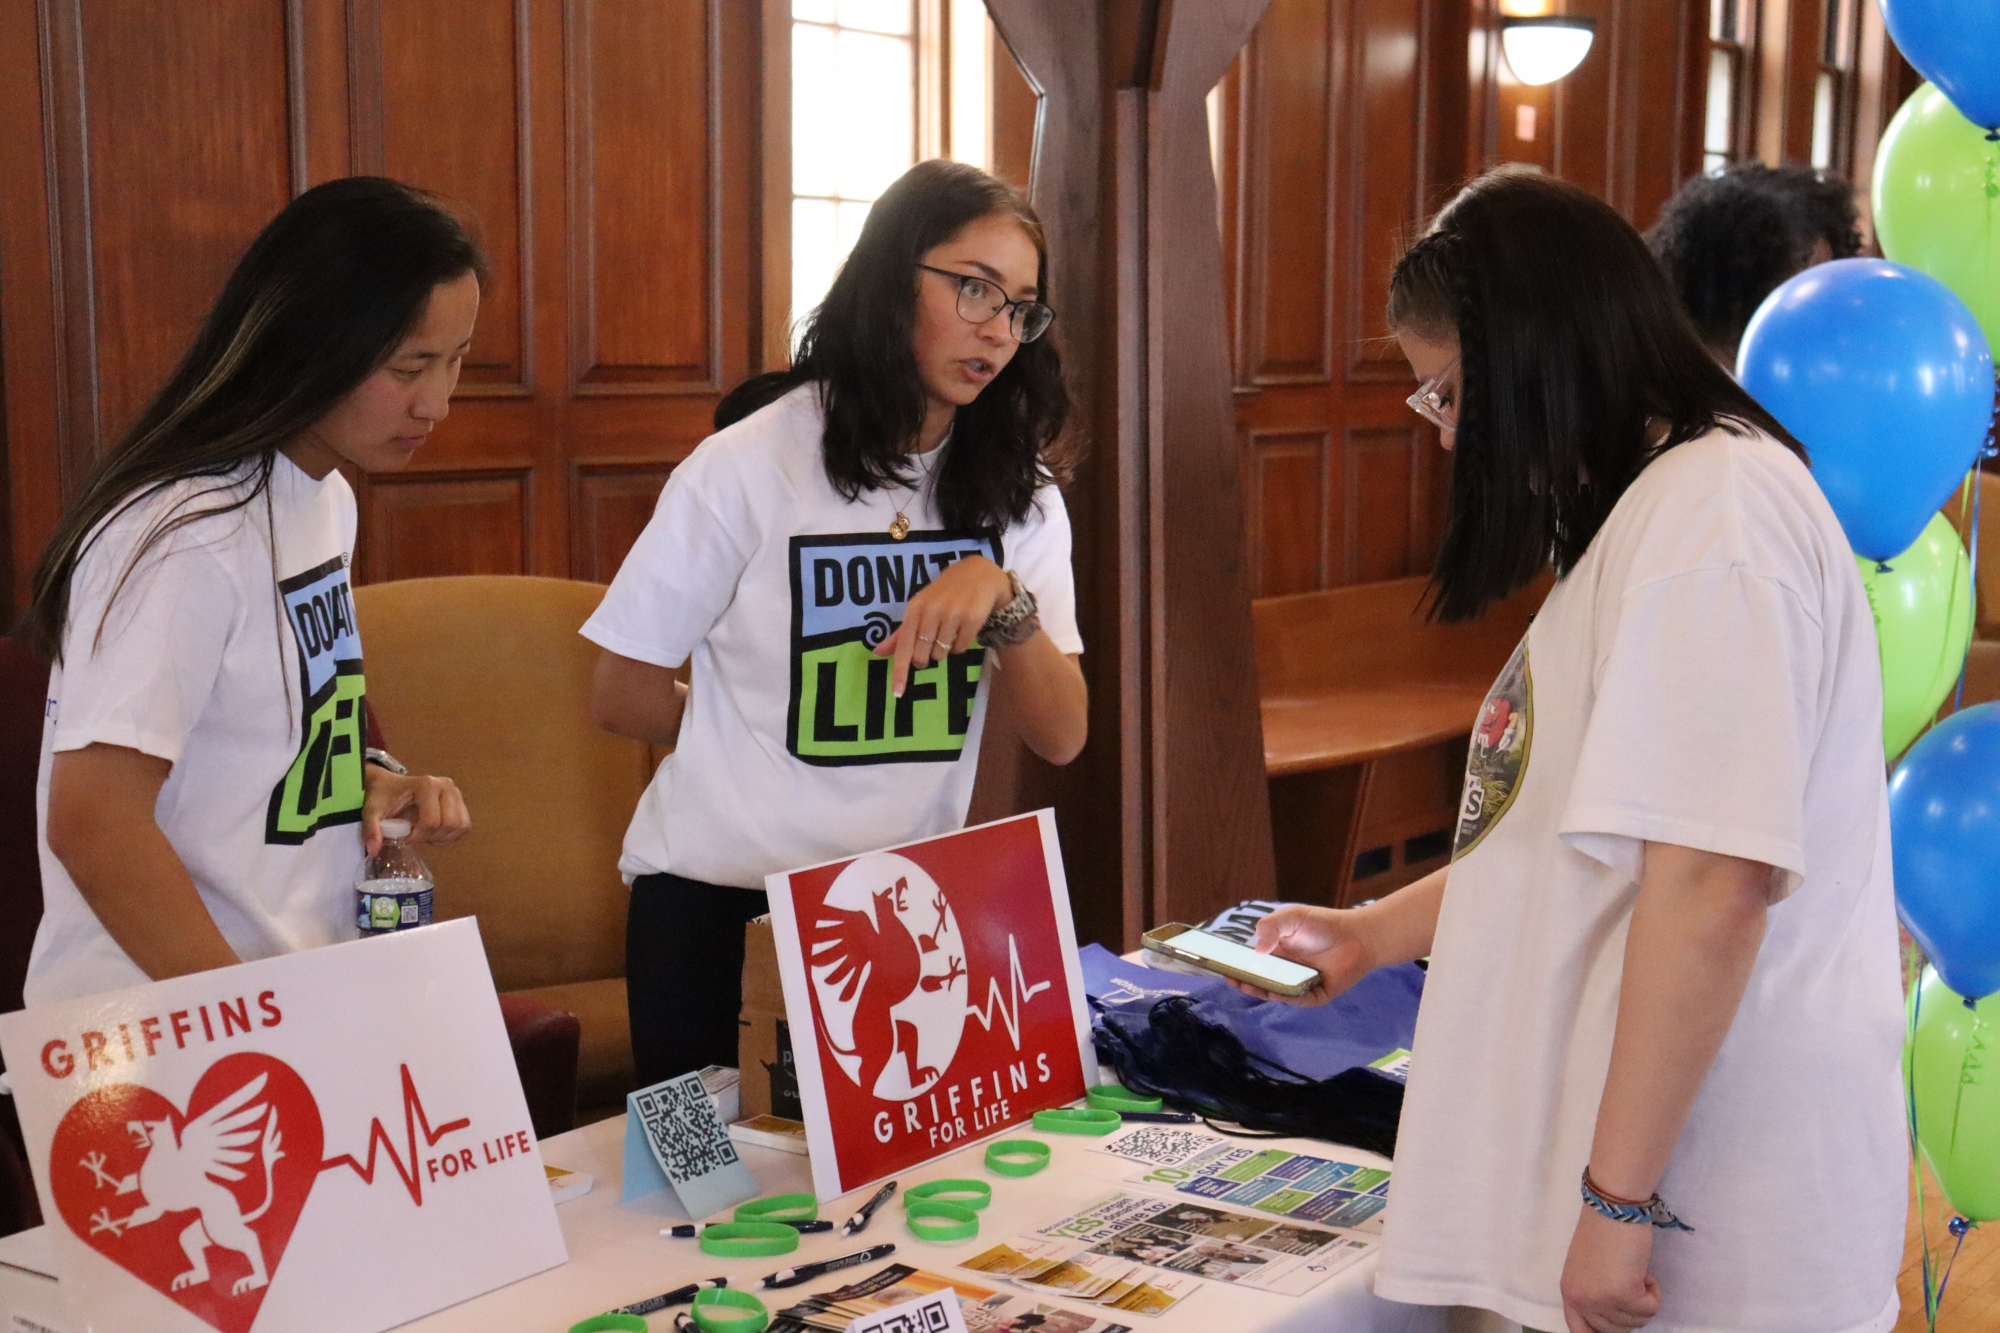 Griffins for Life started in 2022 with a campus event designed to raise awareness for organ donation.